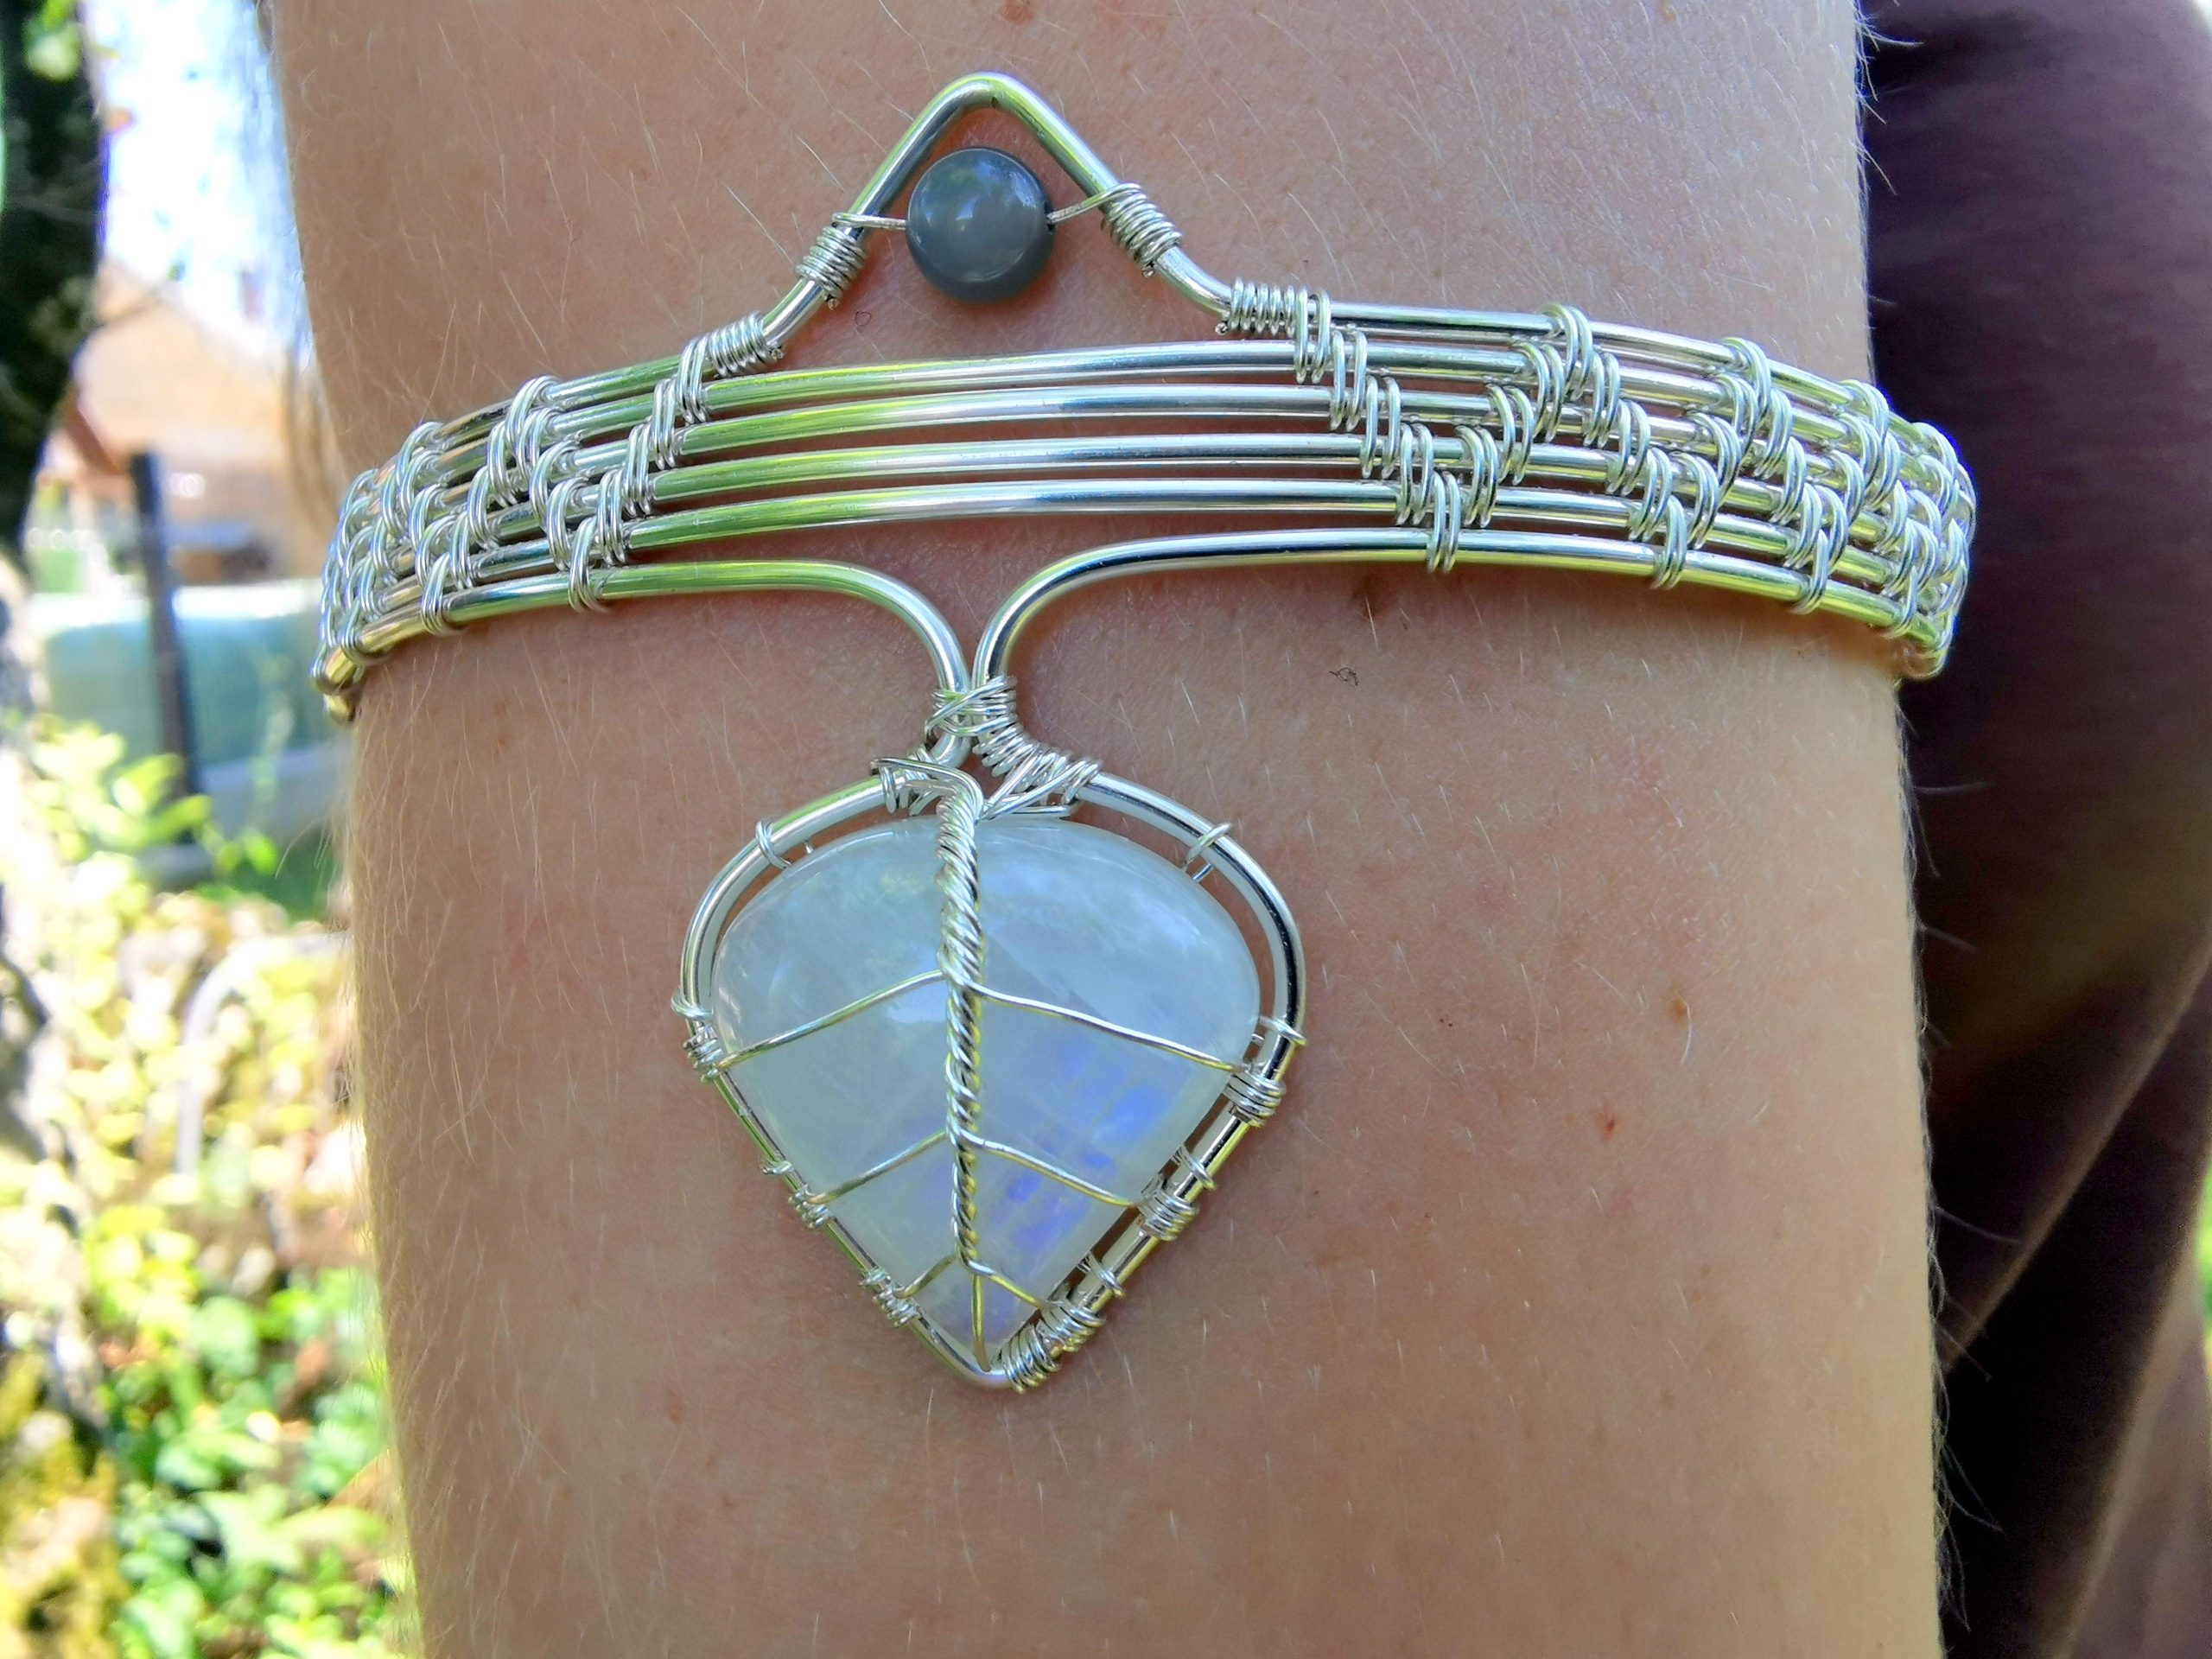 I like working with moonstones :). I archaic about ten meters of wire for this armlet. The bead is a labradorite.